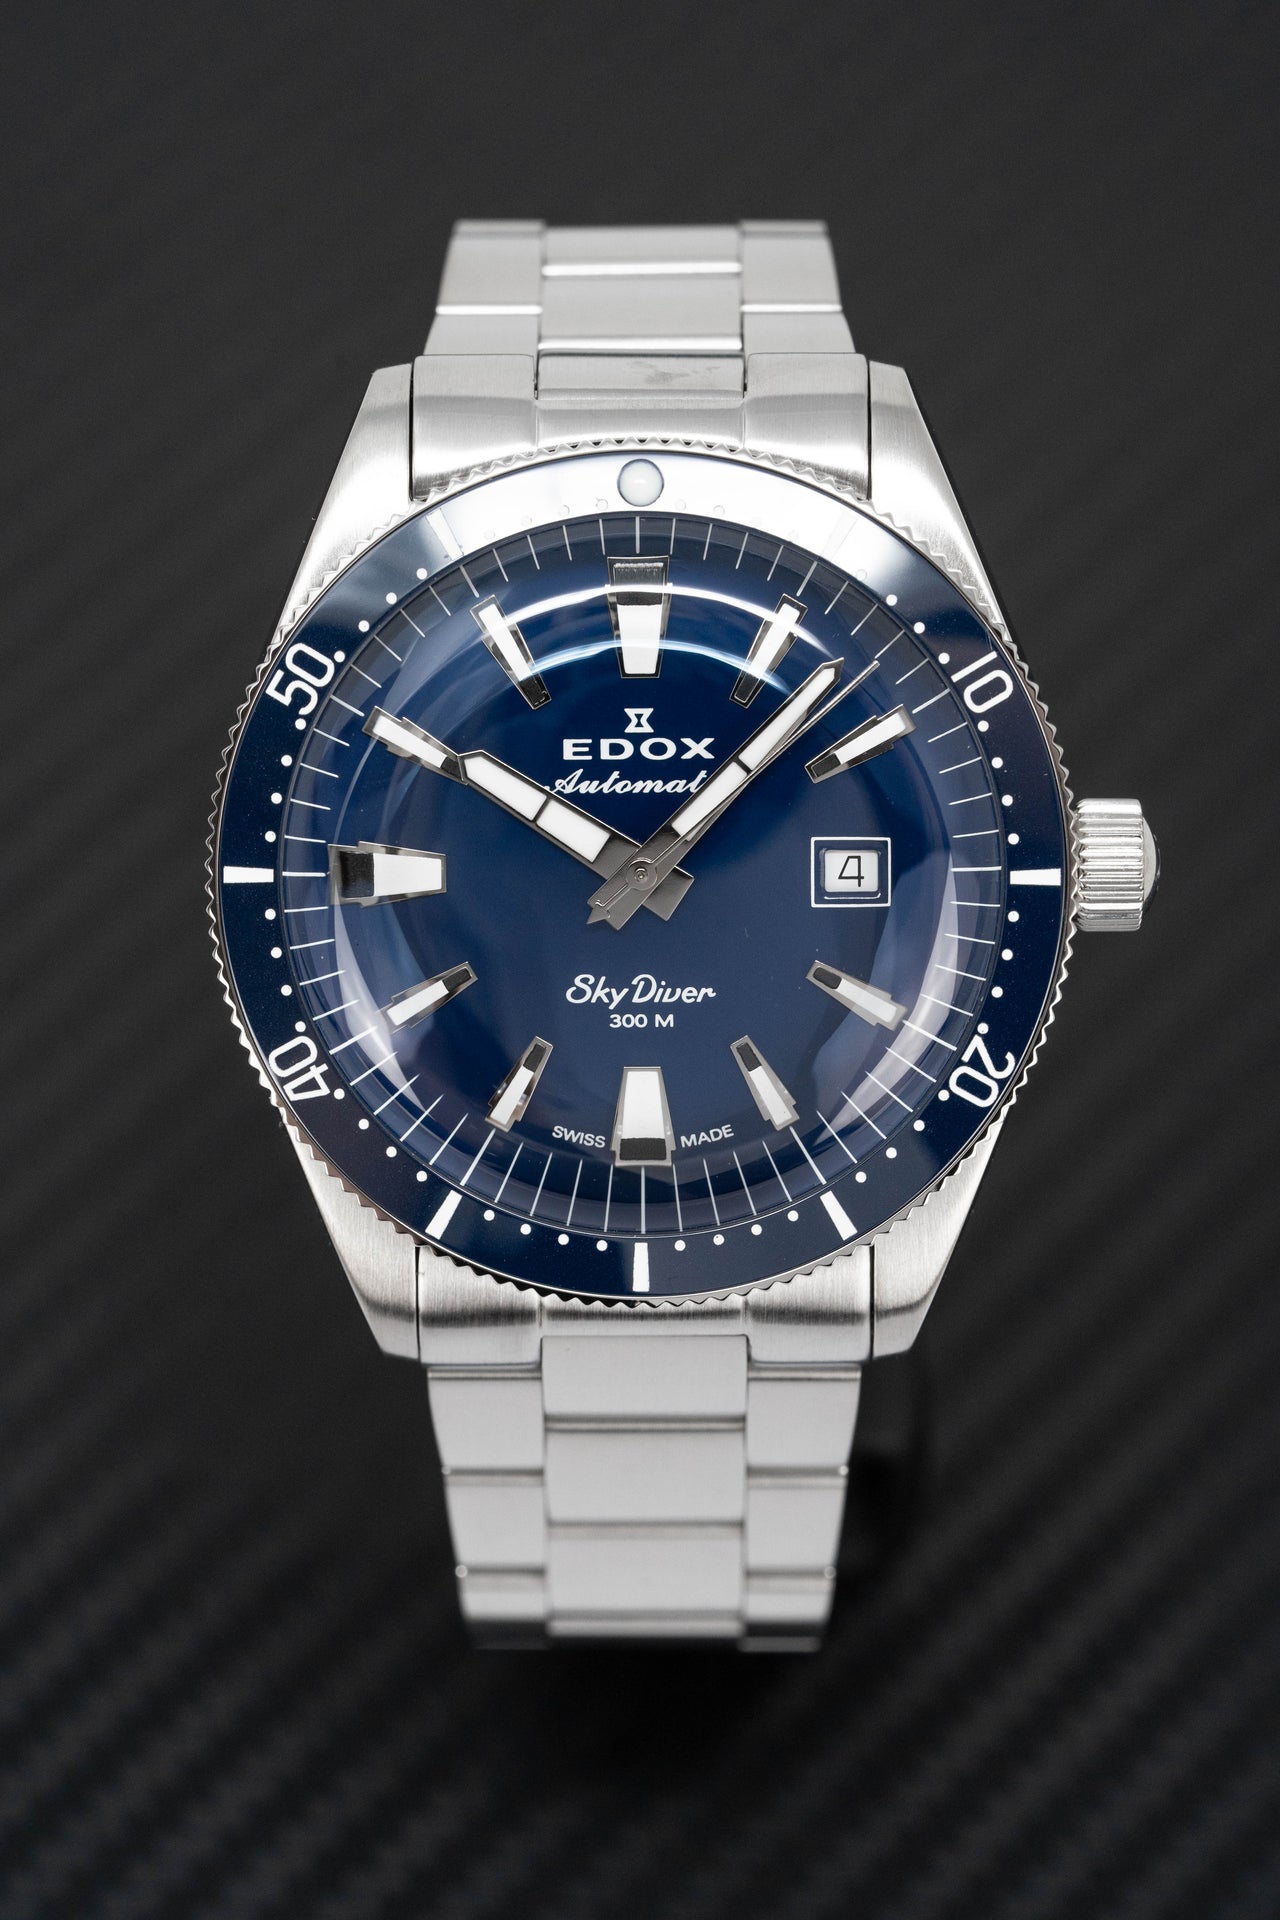 Edox Men's Watch Limited Edition Sky Diver Automatic Blue 80126-3BUM-BUIN